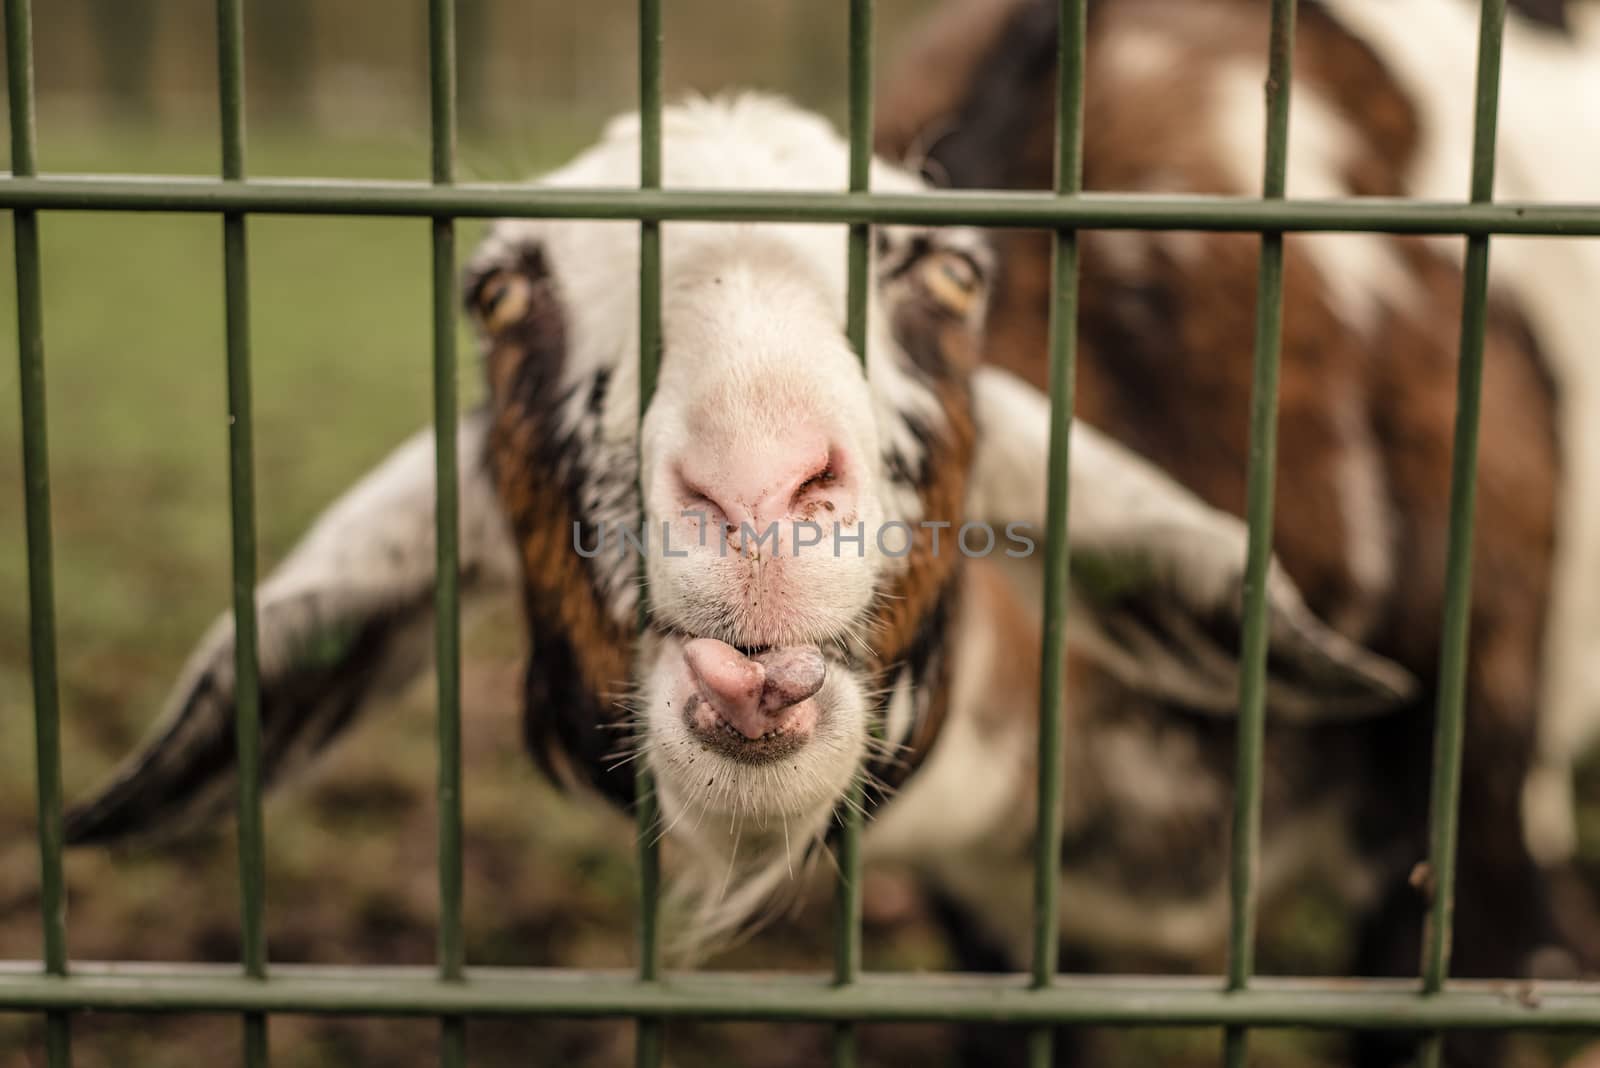 A goat sticks its nose through a fence, making a funny face